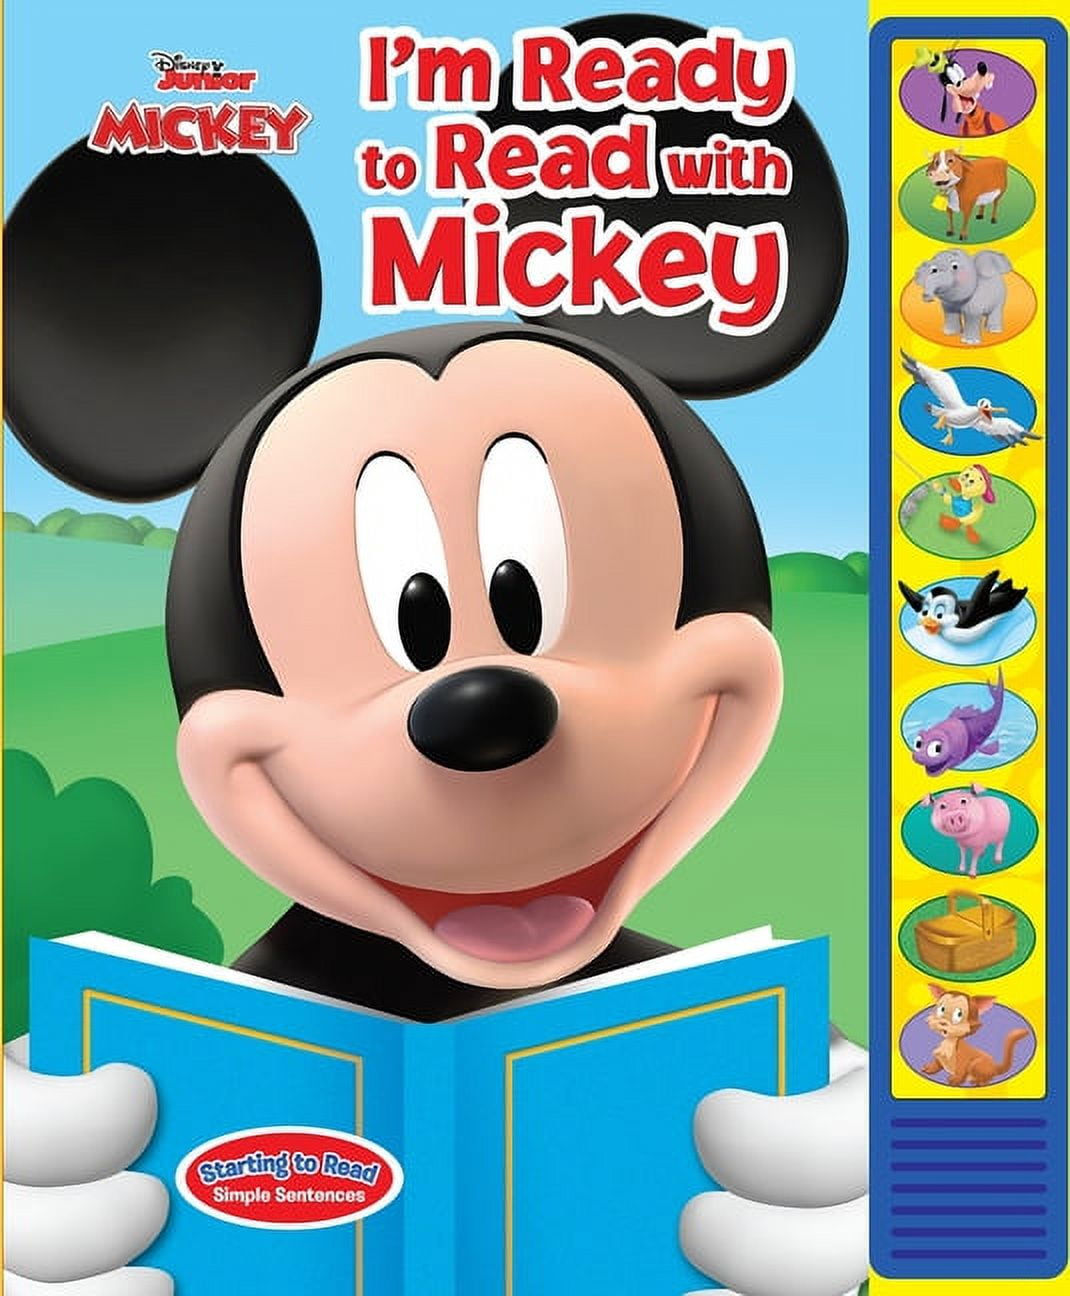 Gone Fishing! (Disney Junior: Mickey and the Roadster Racers) [Book]